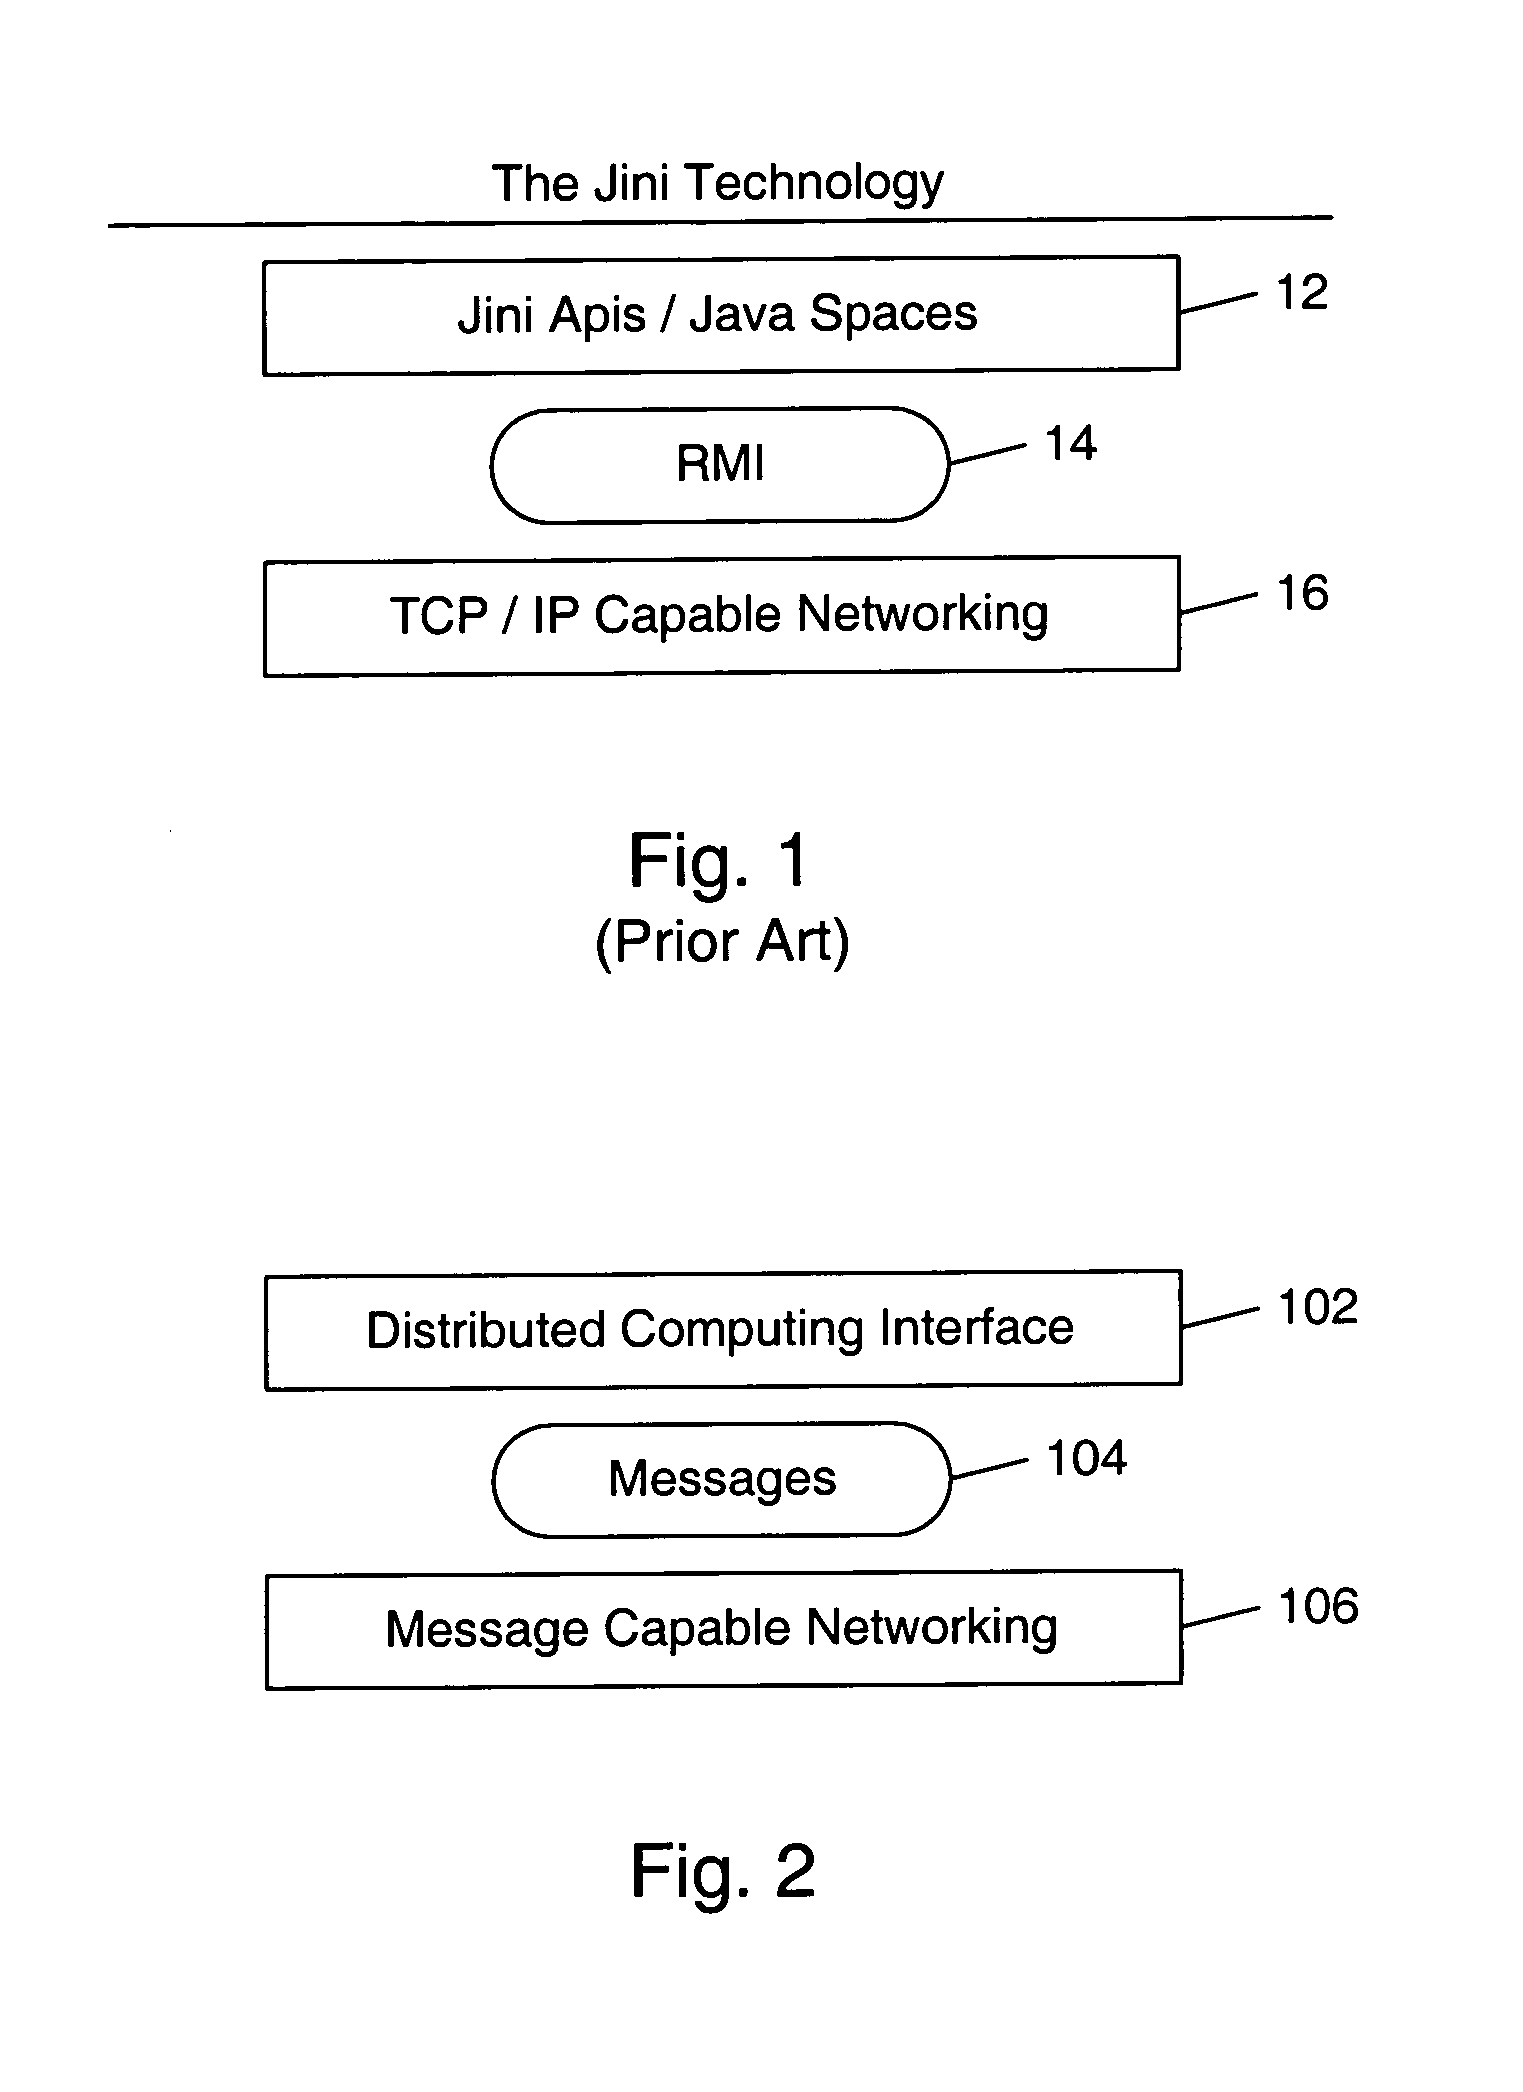 Remote method invocation with secure messaging in a distributed computing environment